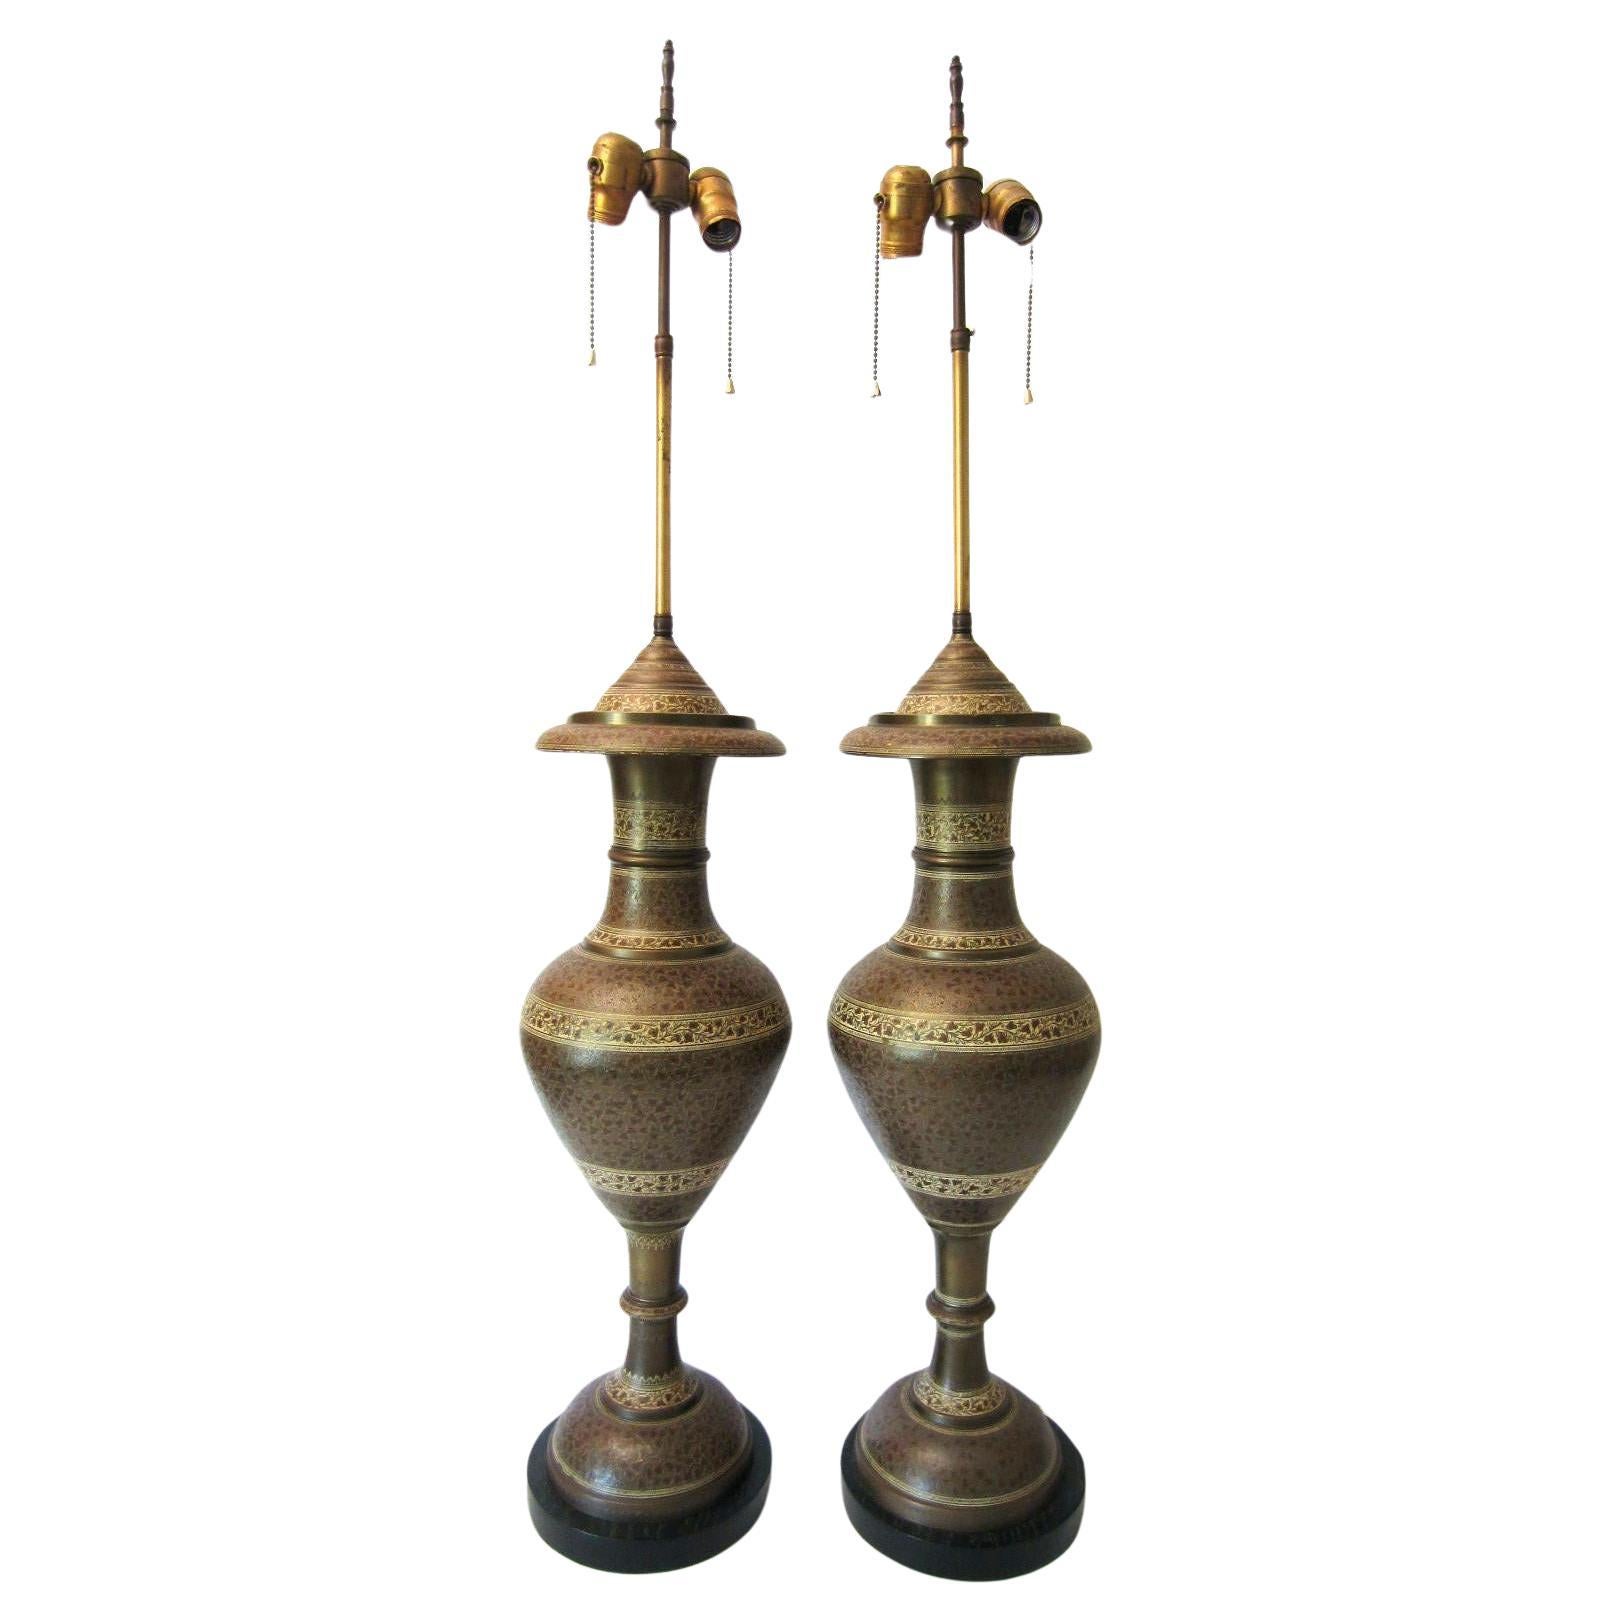 Tall pair of hand tooled brass urn table lamps from the Art Deco era.
Urns are mounted to an ebonized wooden base.
Double standard bulb sockets for each. Exceptional condition.
